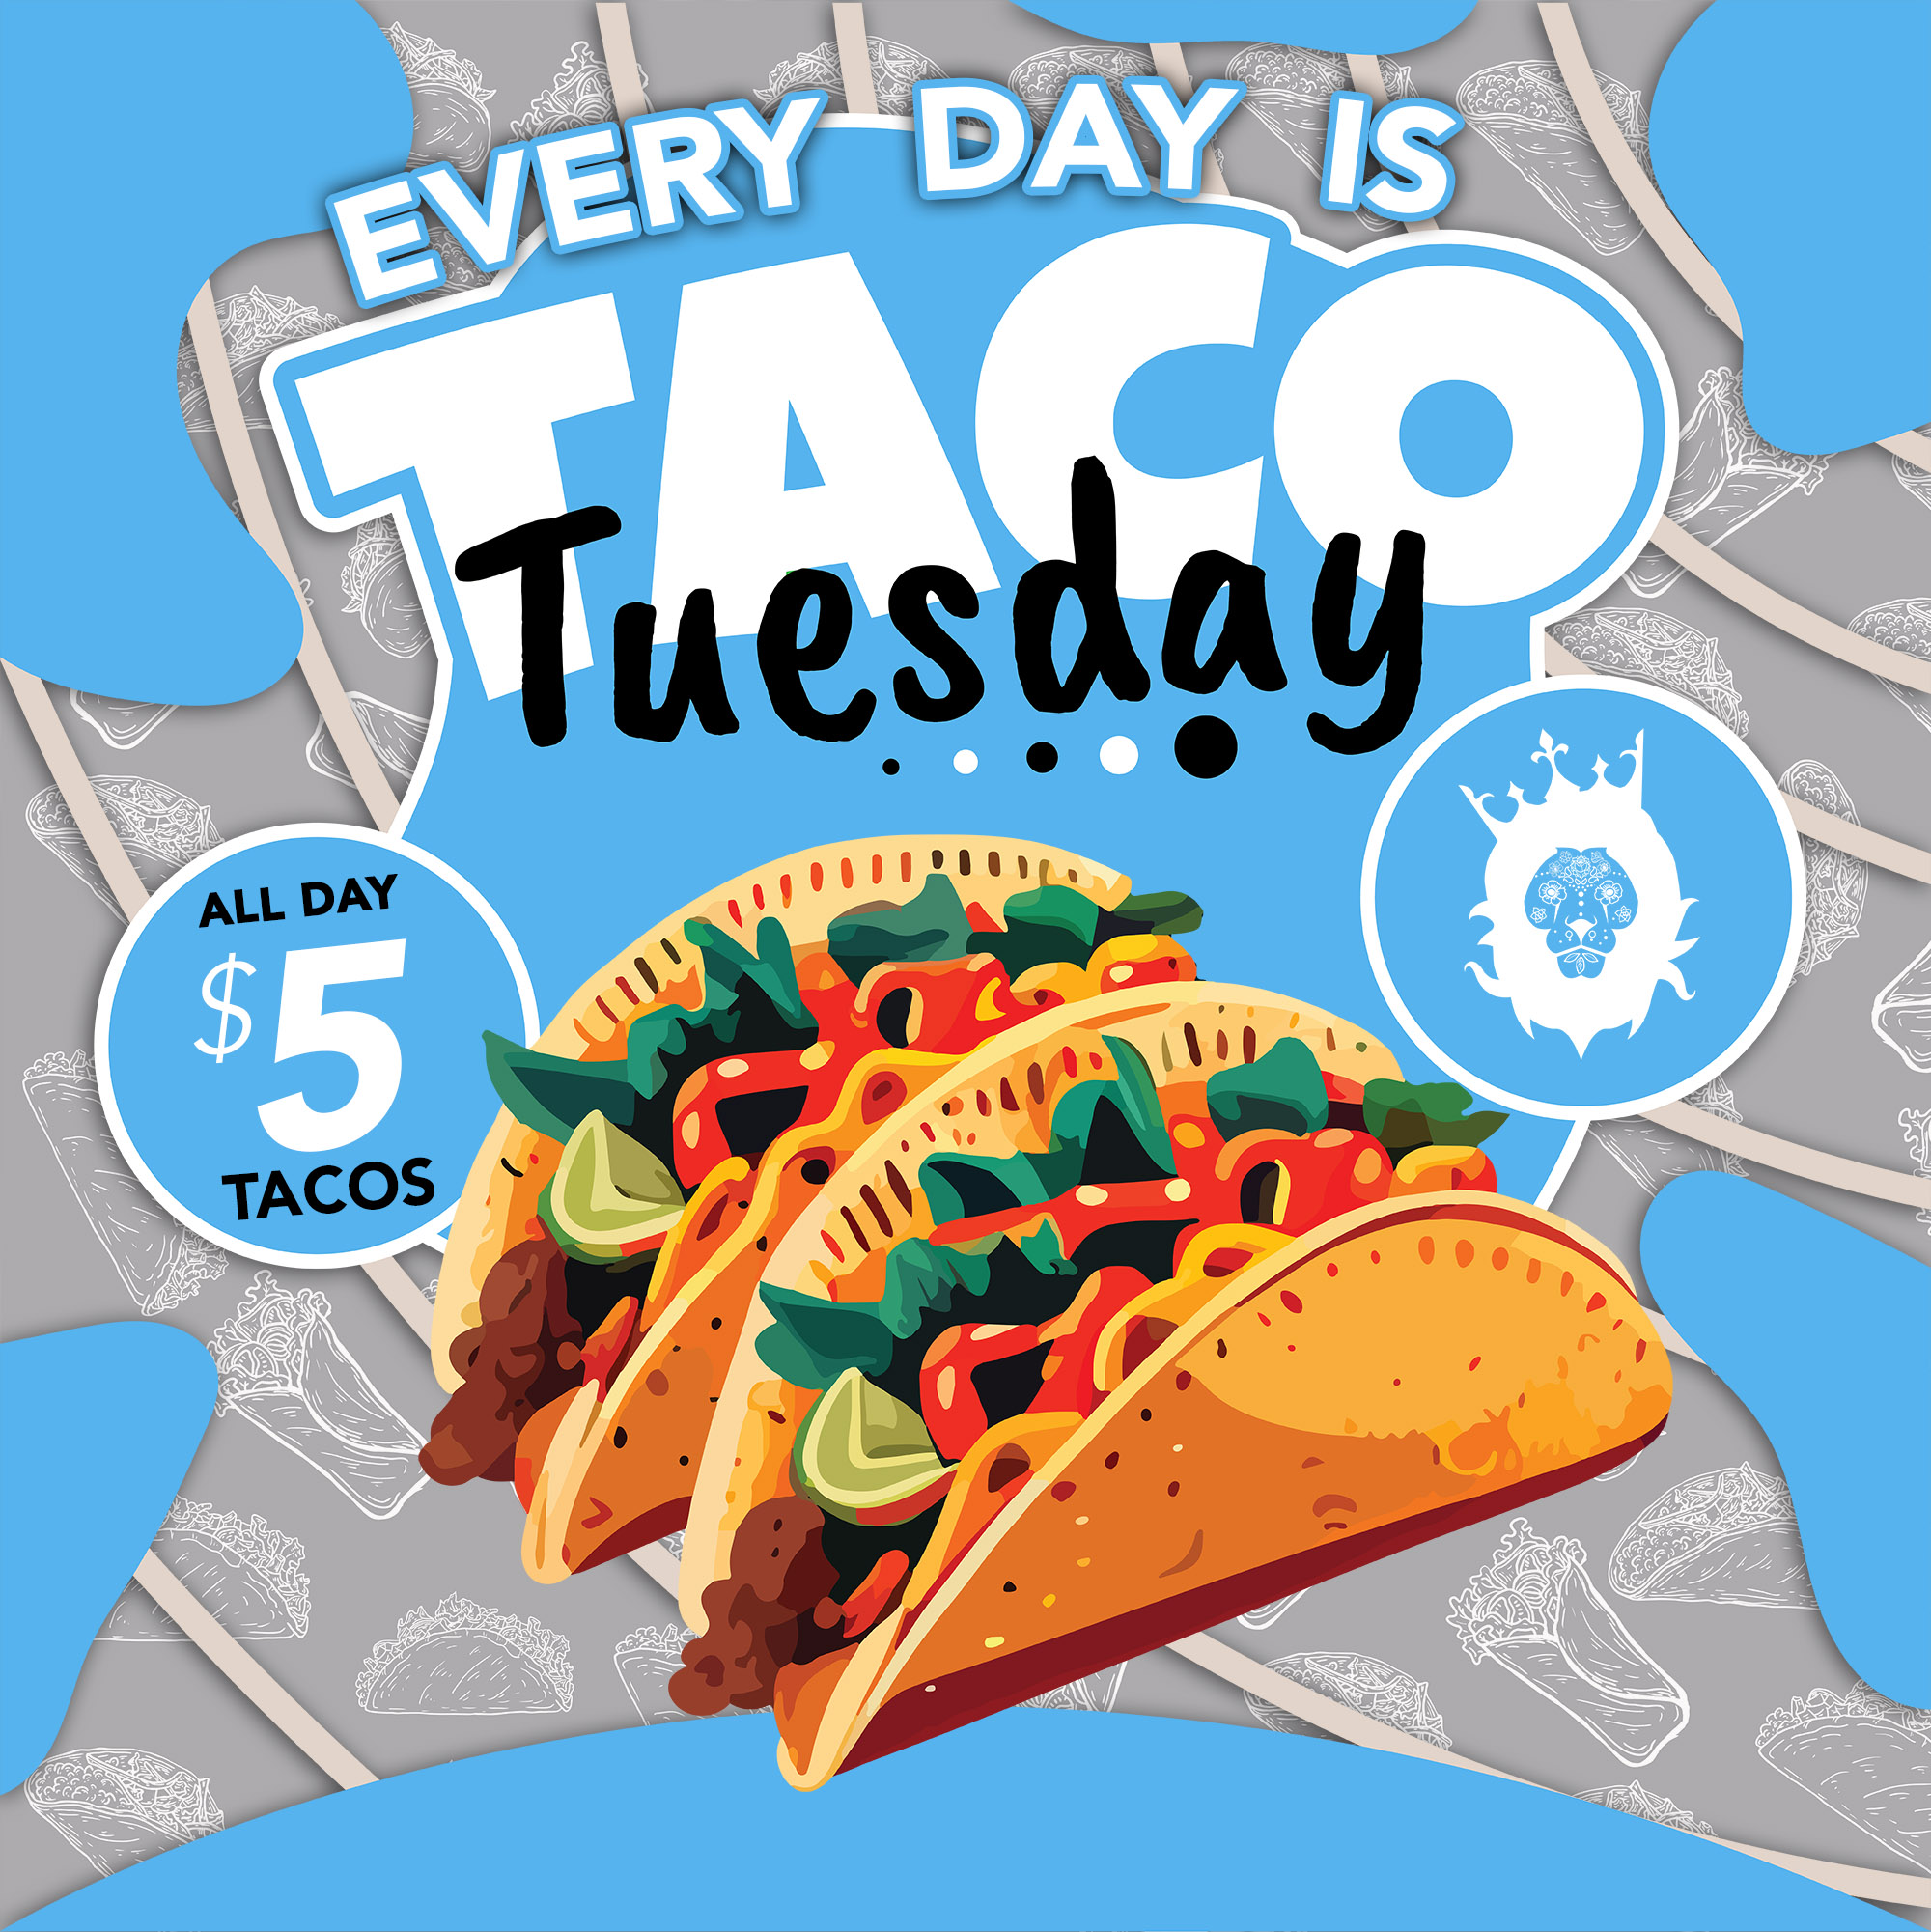 Every Day is Taco Tuesday - $5 Tacos ALL DAY